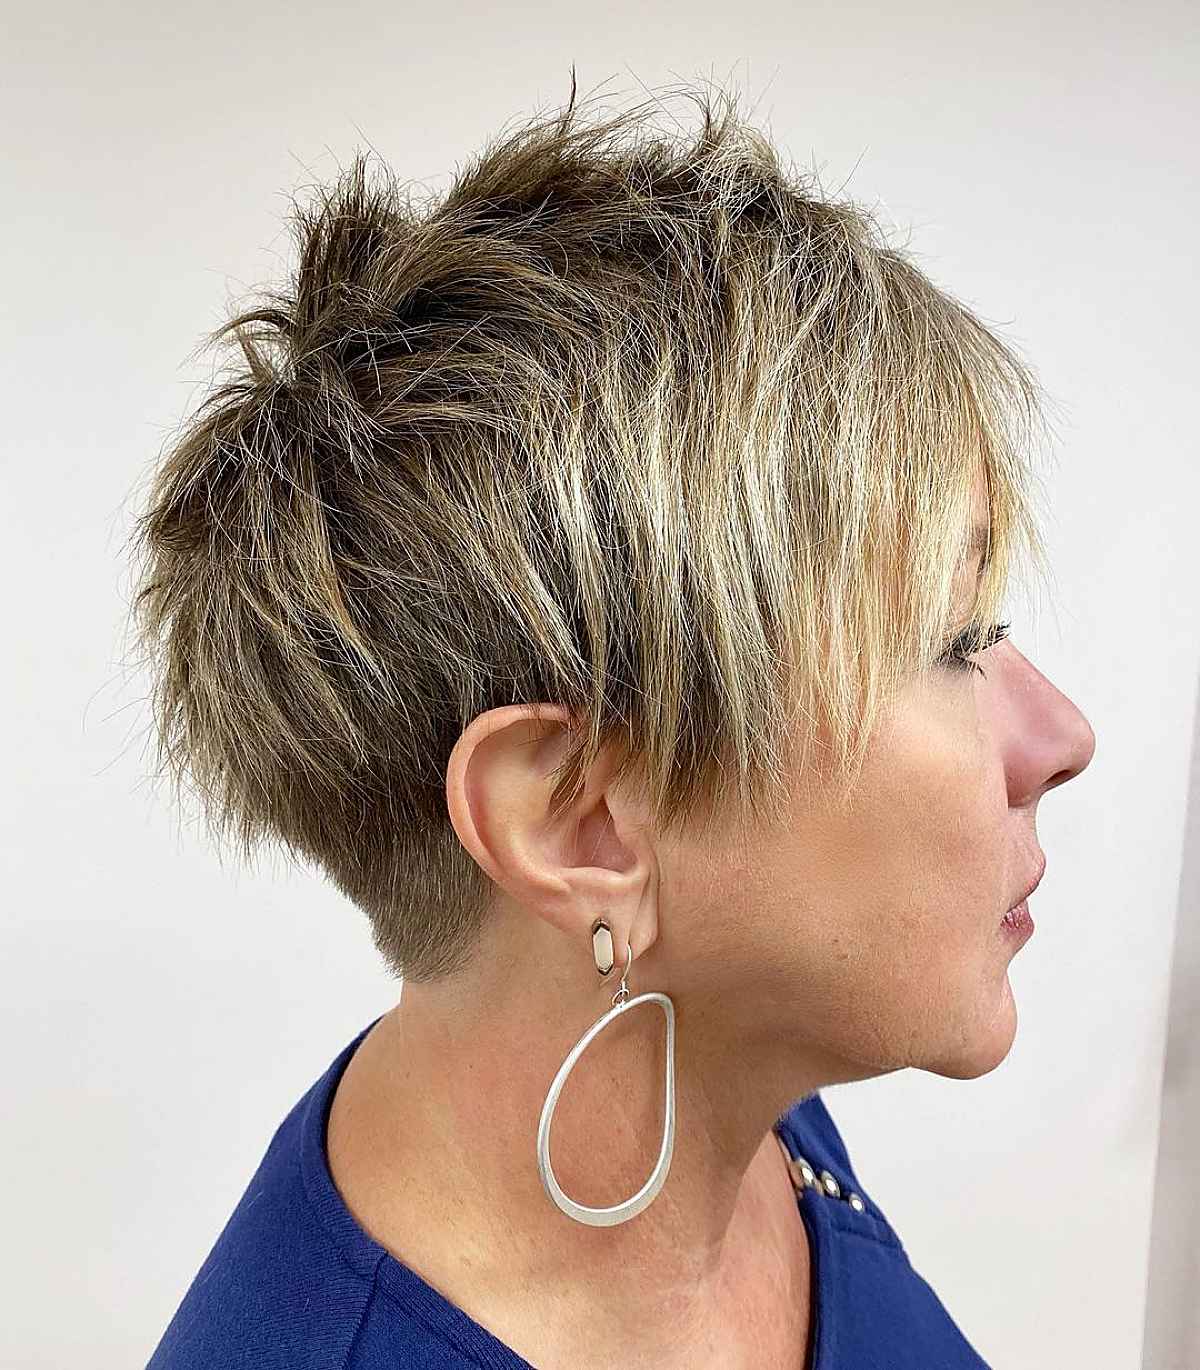 26 Messy Pixie Cuts for a Tousled, Chic Look